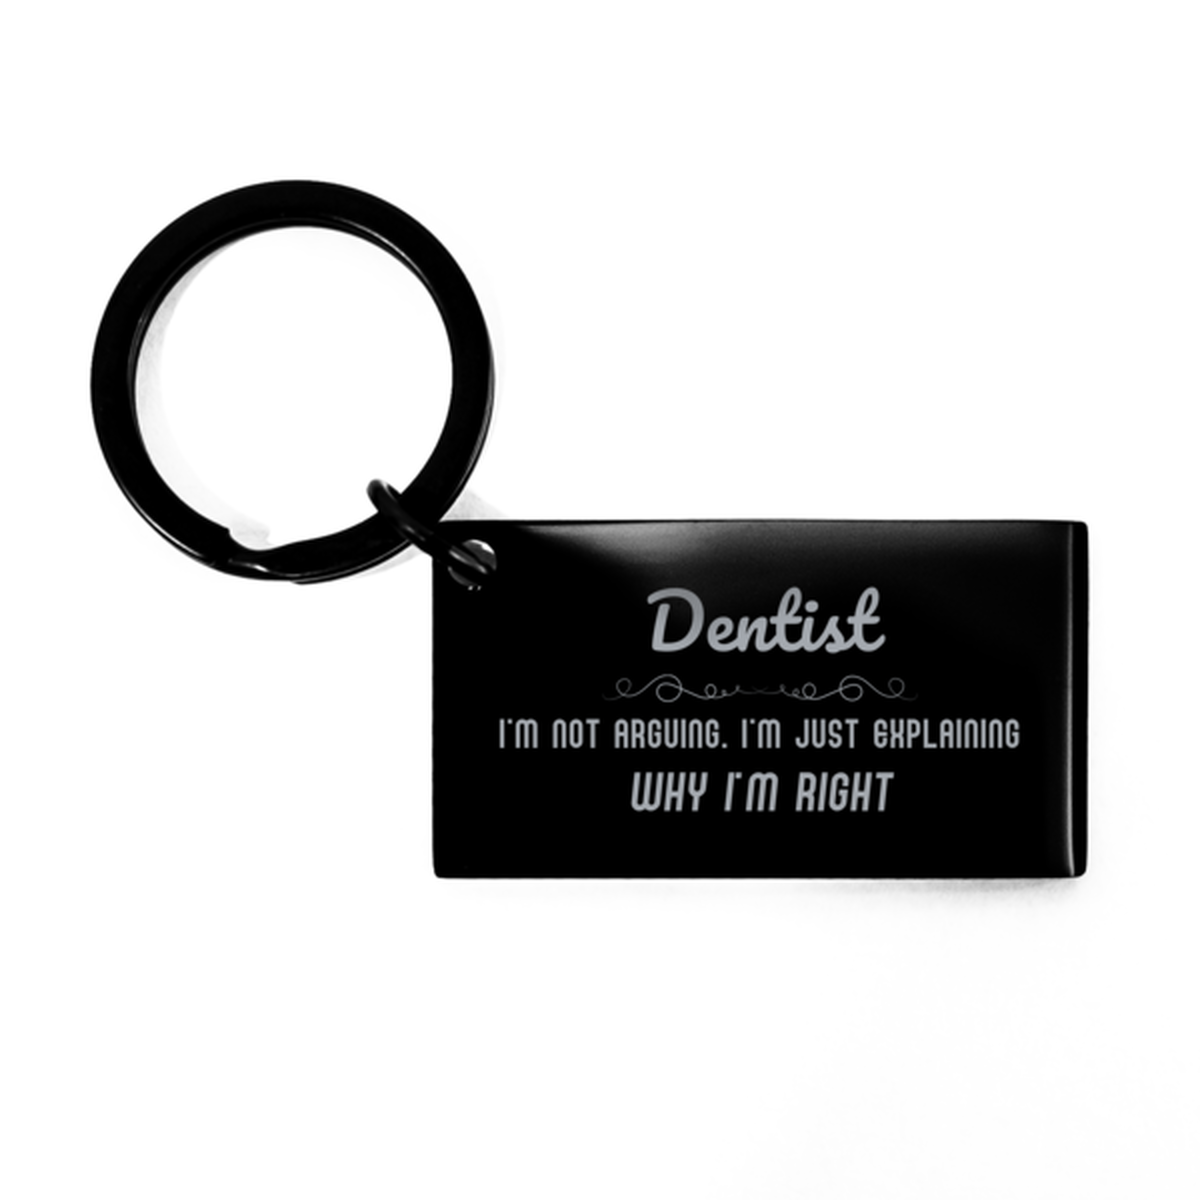 Dentist I'm not Arguing. I'm Just Explaining Why I'm RIGHT Keychain, Funny Saying Quote Dentist Gifts For Dentist Graduation Birthday Christmas Gifts for Men Women Coworker